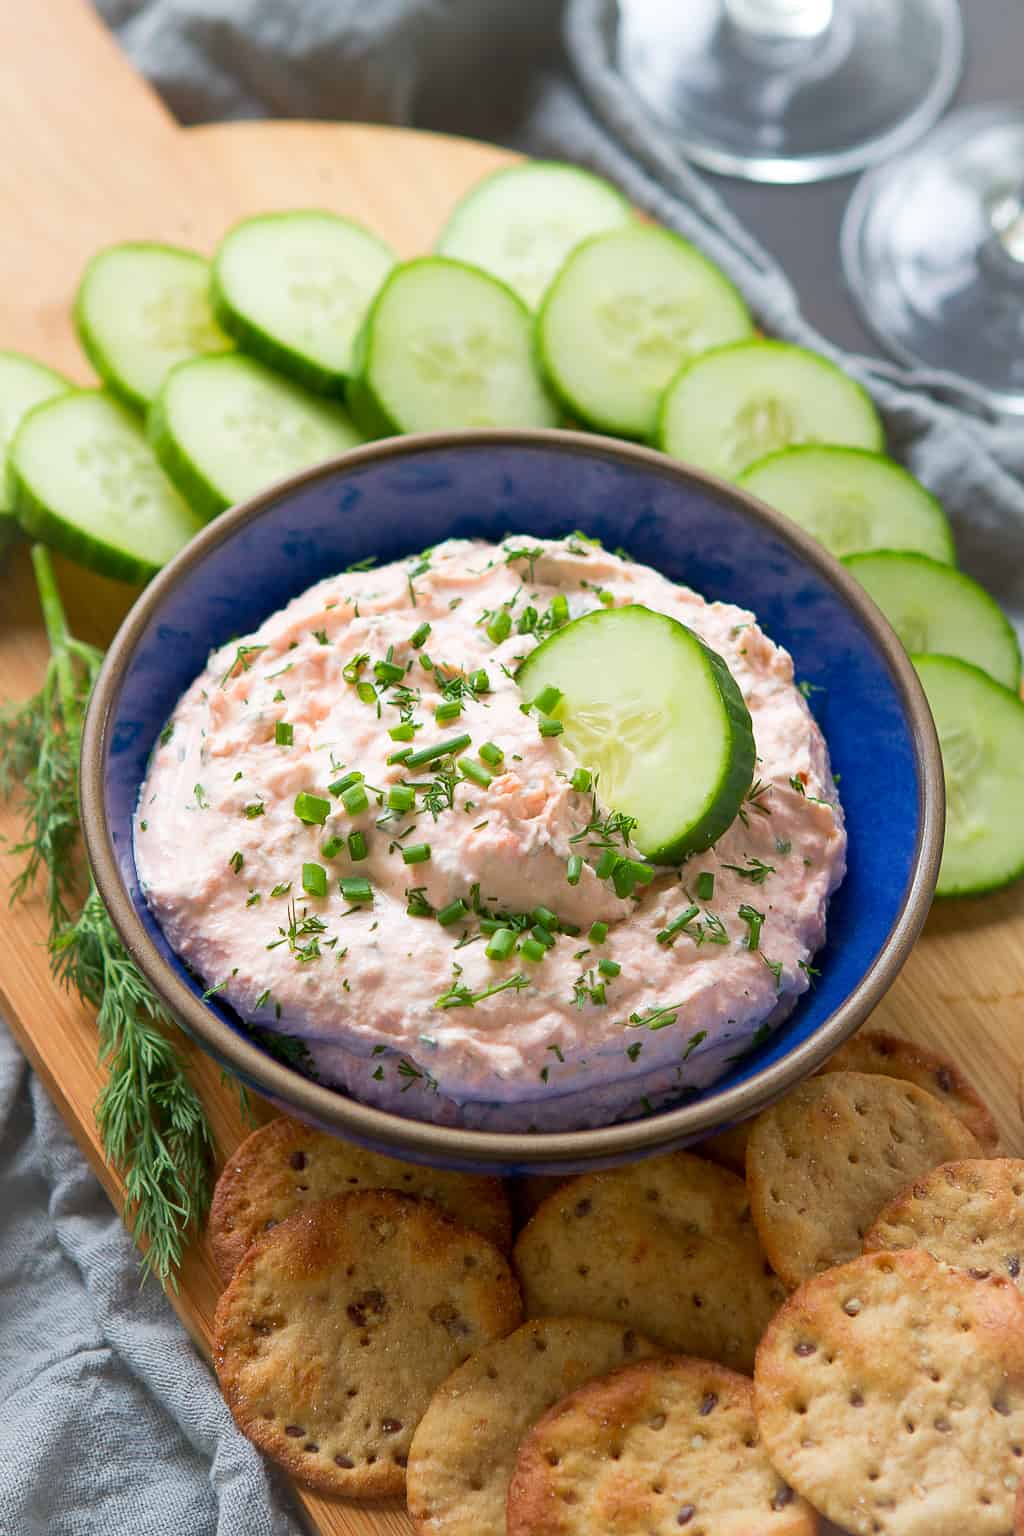 Smoked salmon dip in a blue bowl, surrounded by cucumber slices and crackers.